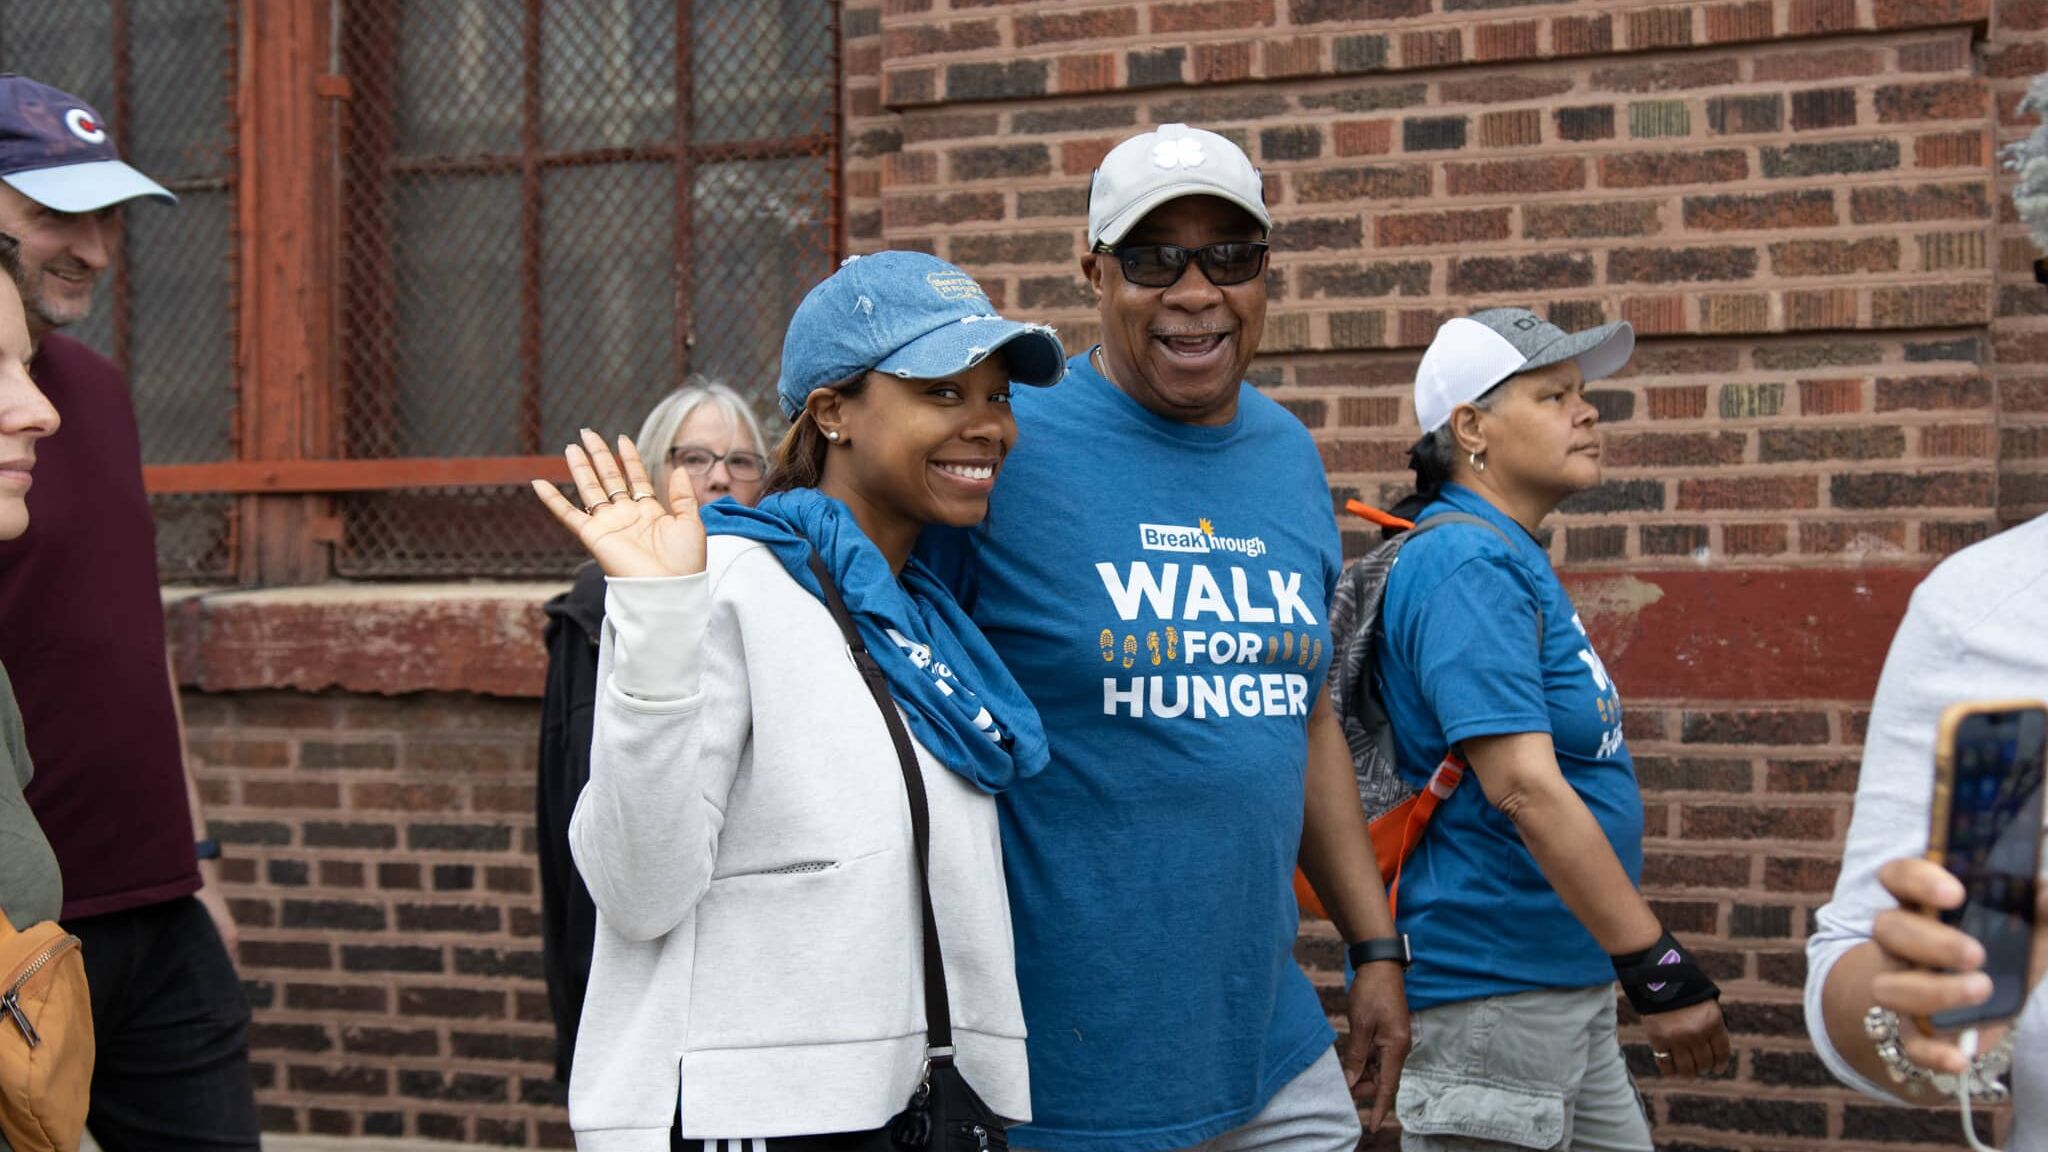 More Than 600 People Participate in Walk for Hunger 1